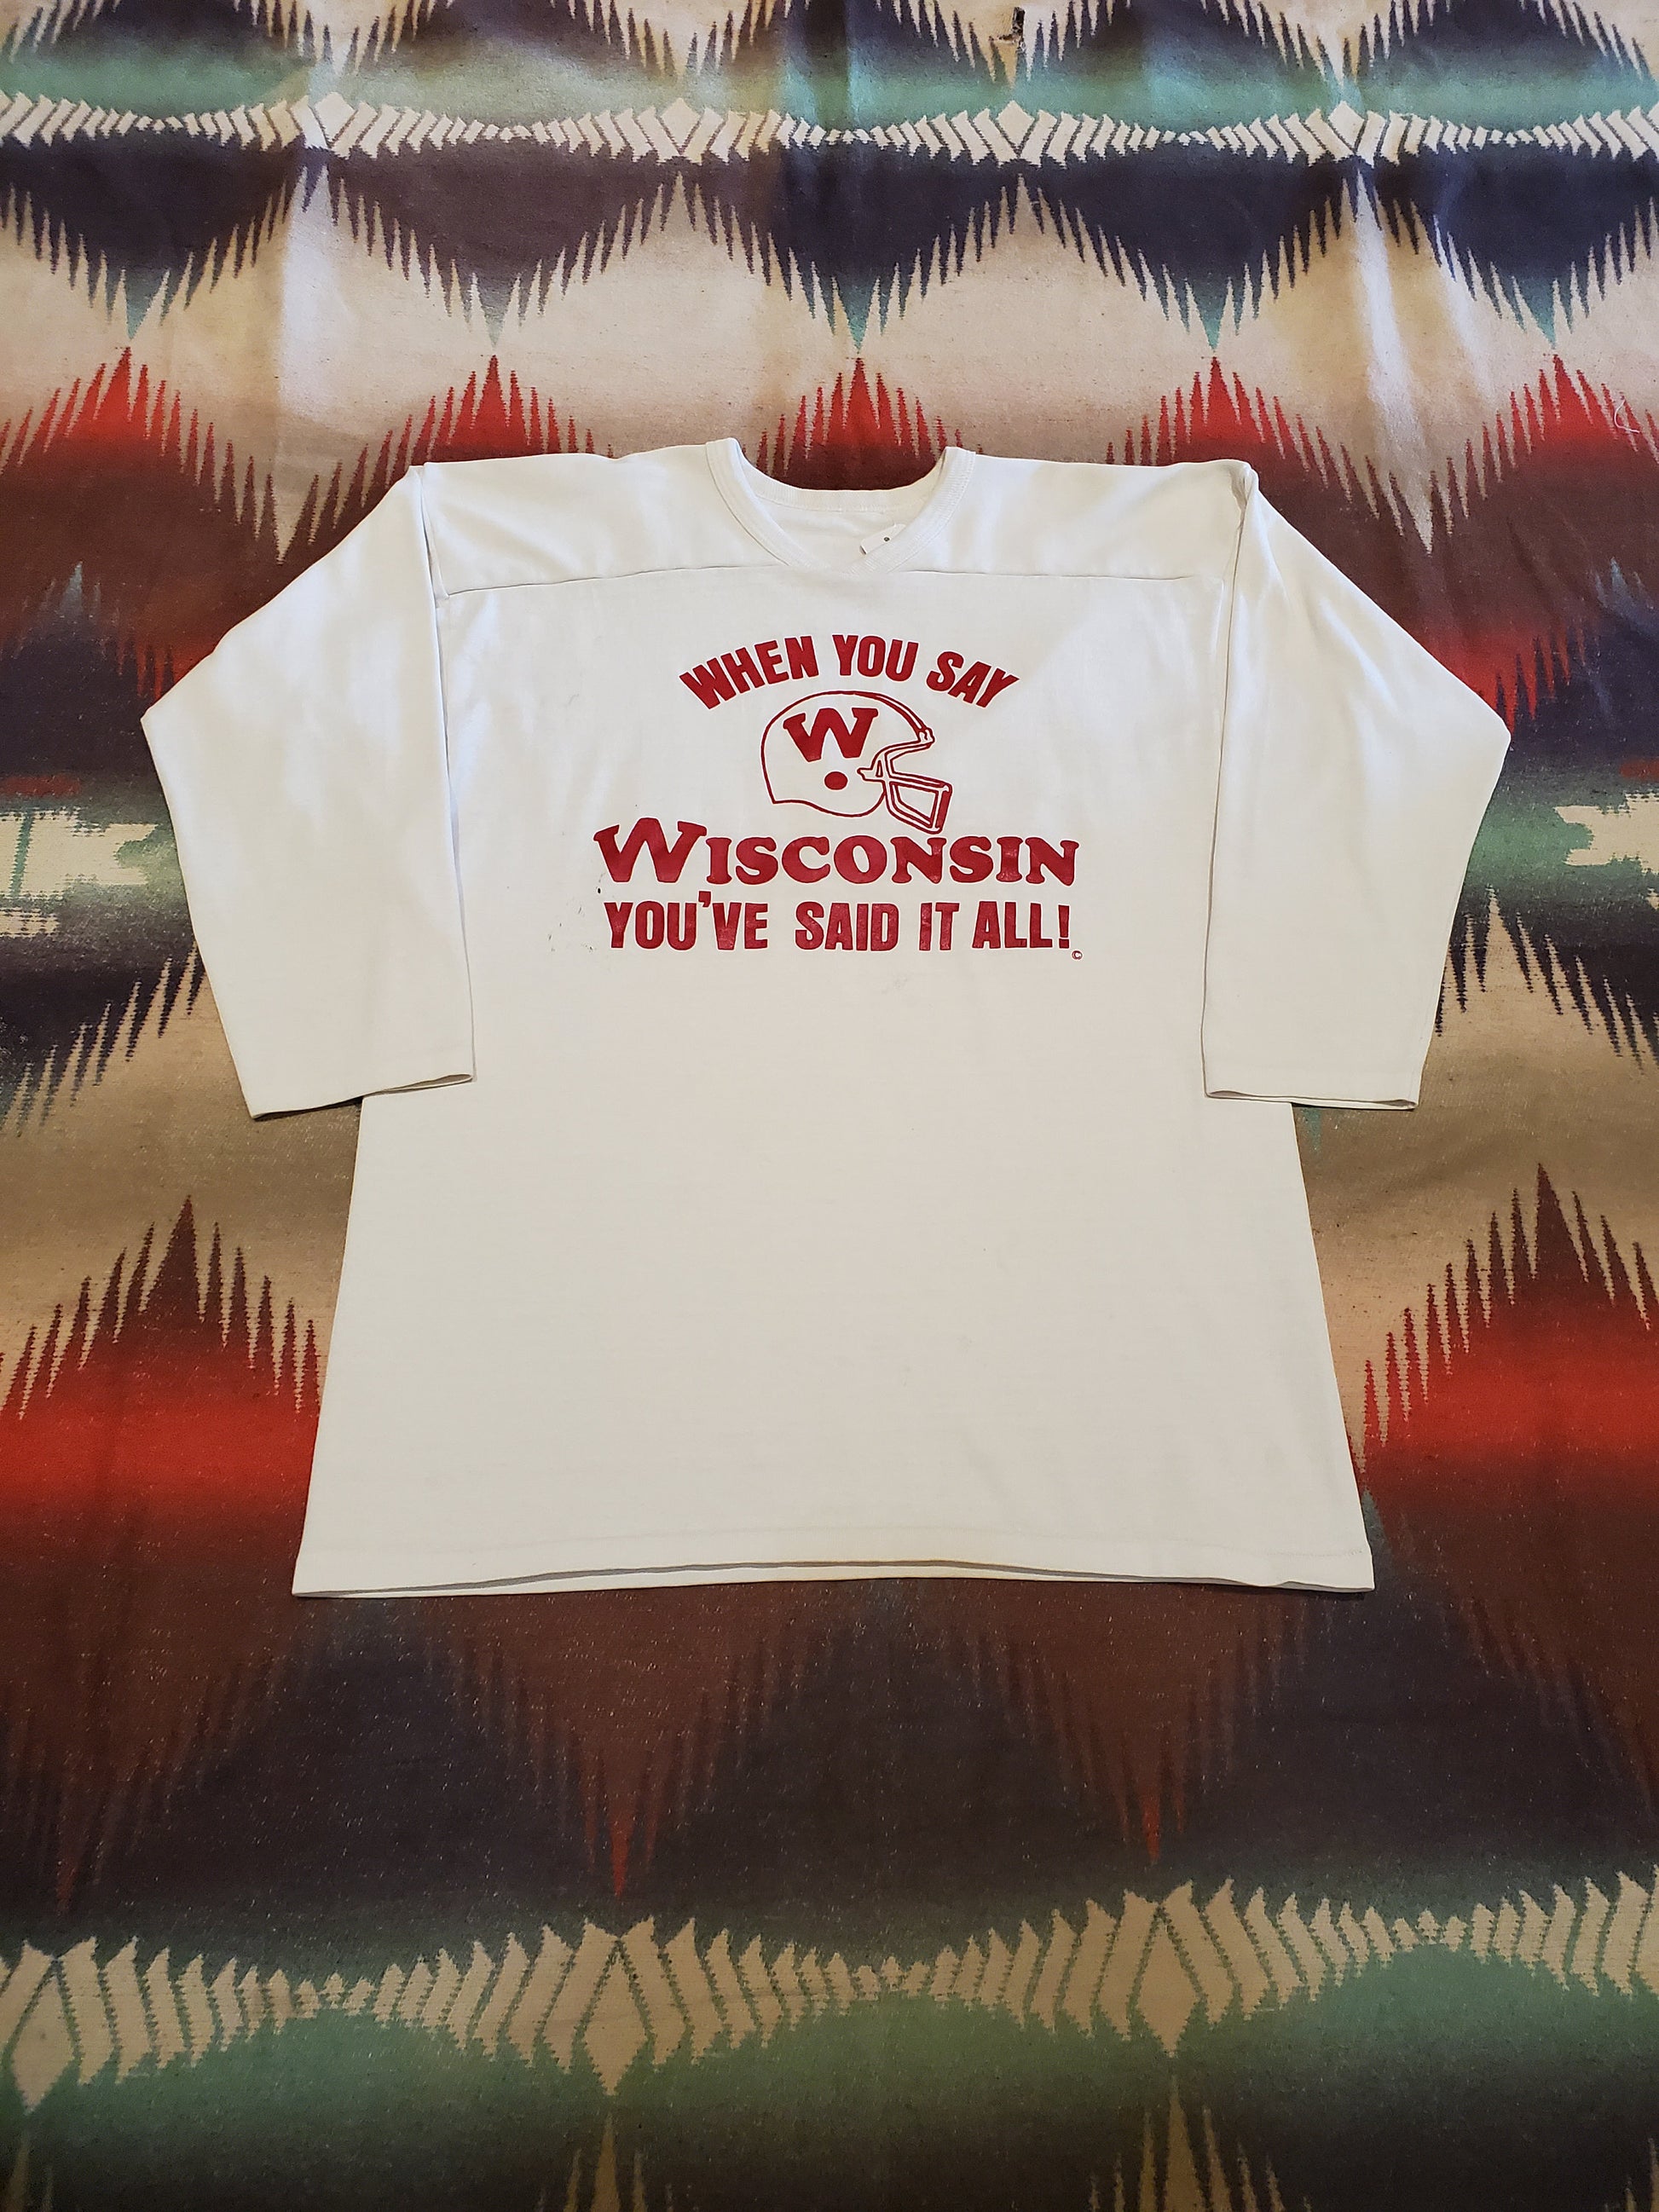 1970s Russell Athletic When You Say Wisconsin Longsleeve Cotton Blend Football Jersey Made in USA Size L